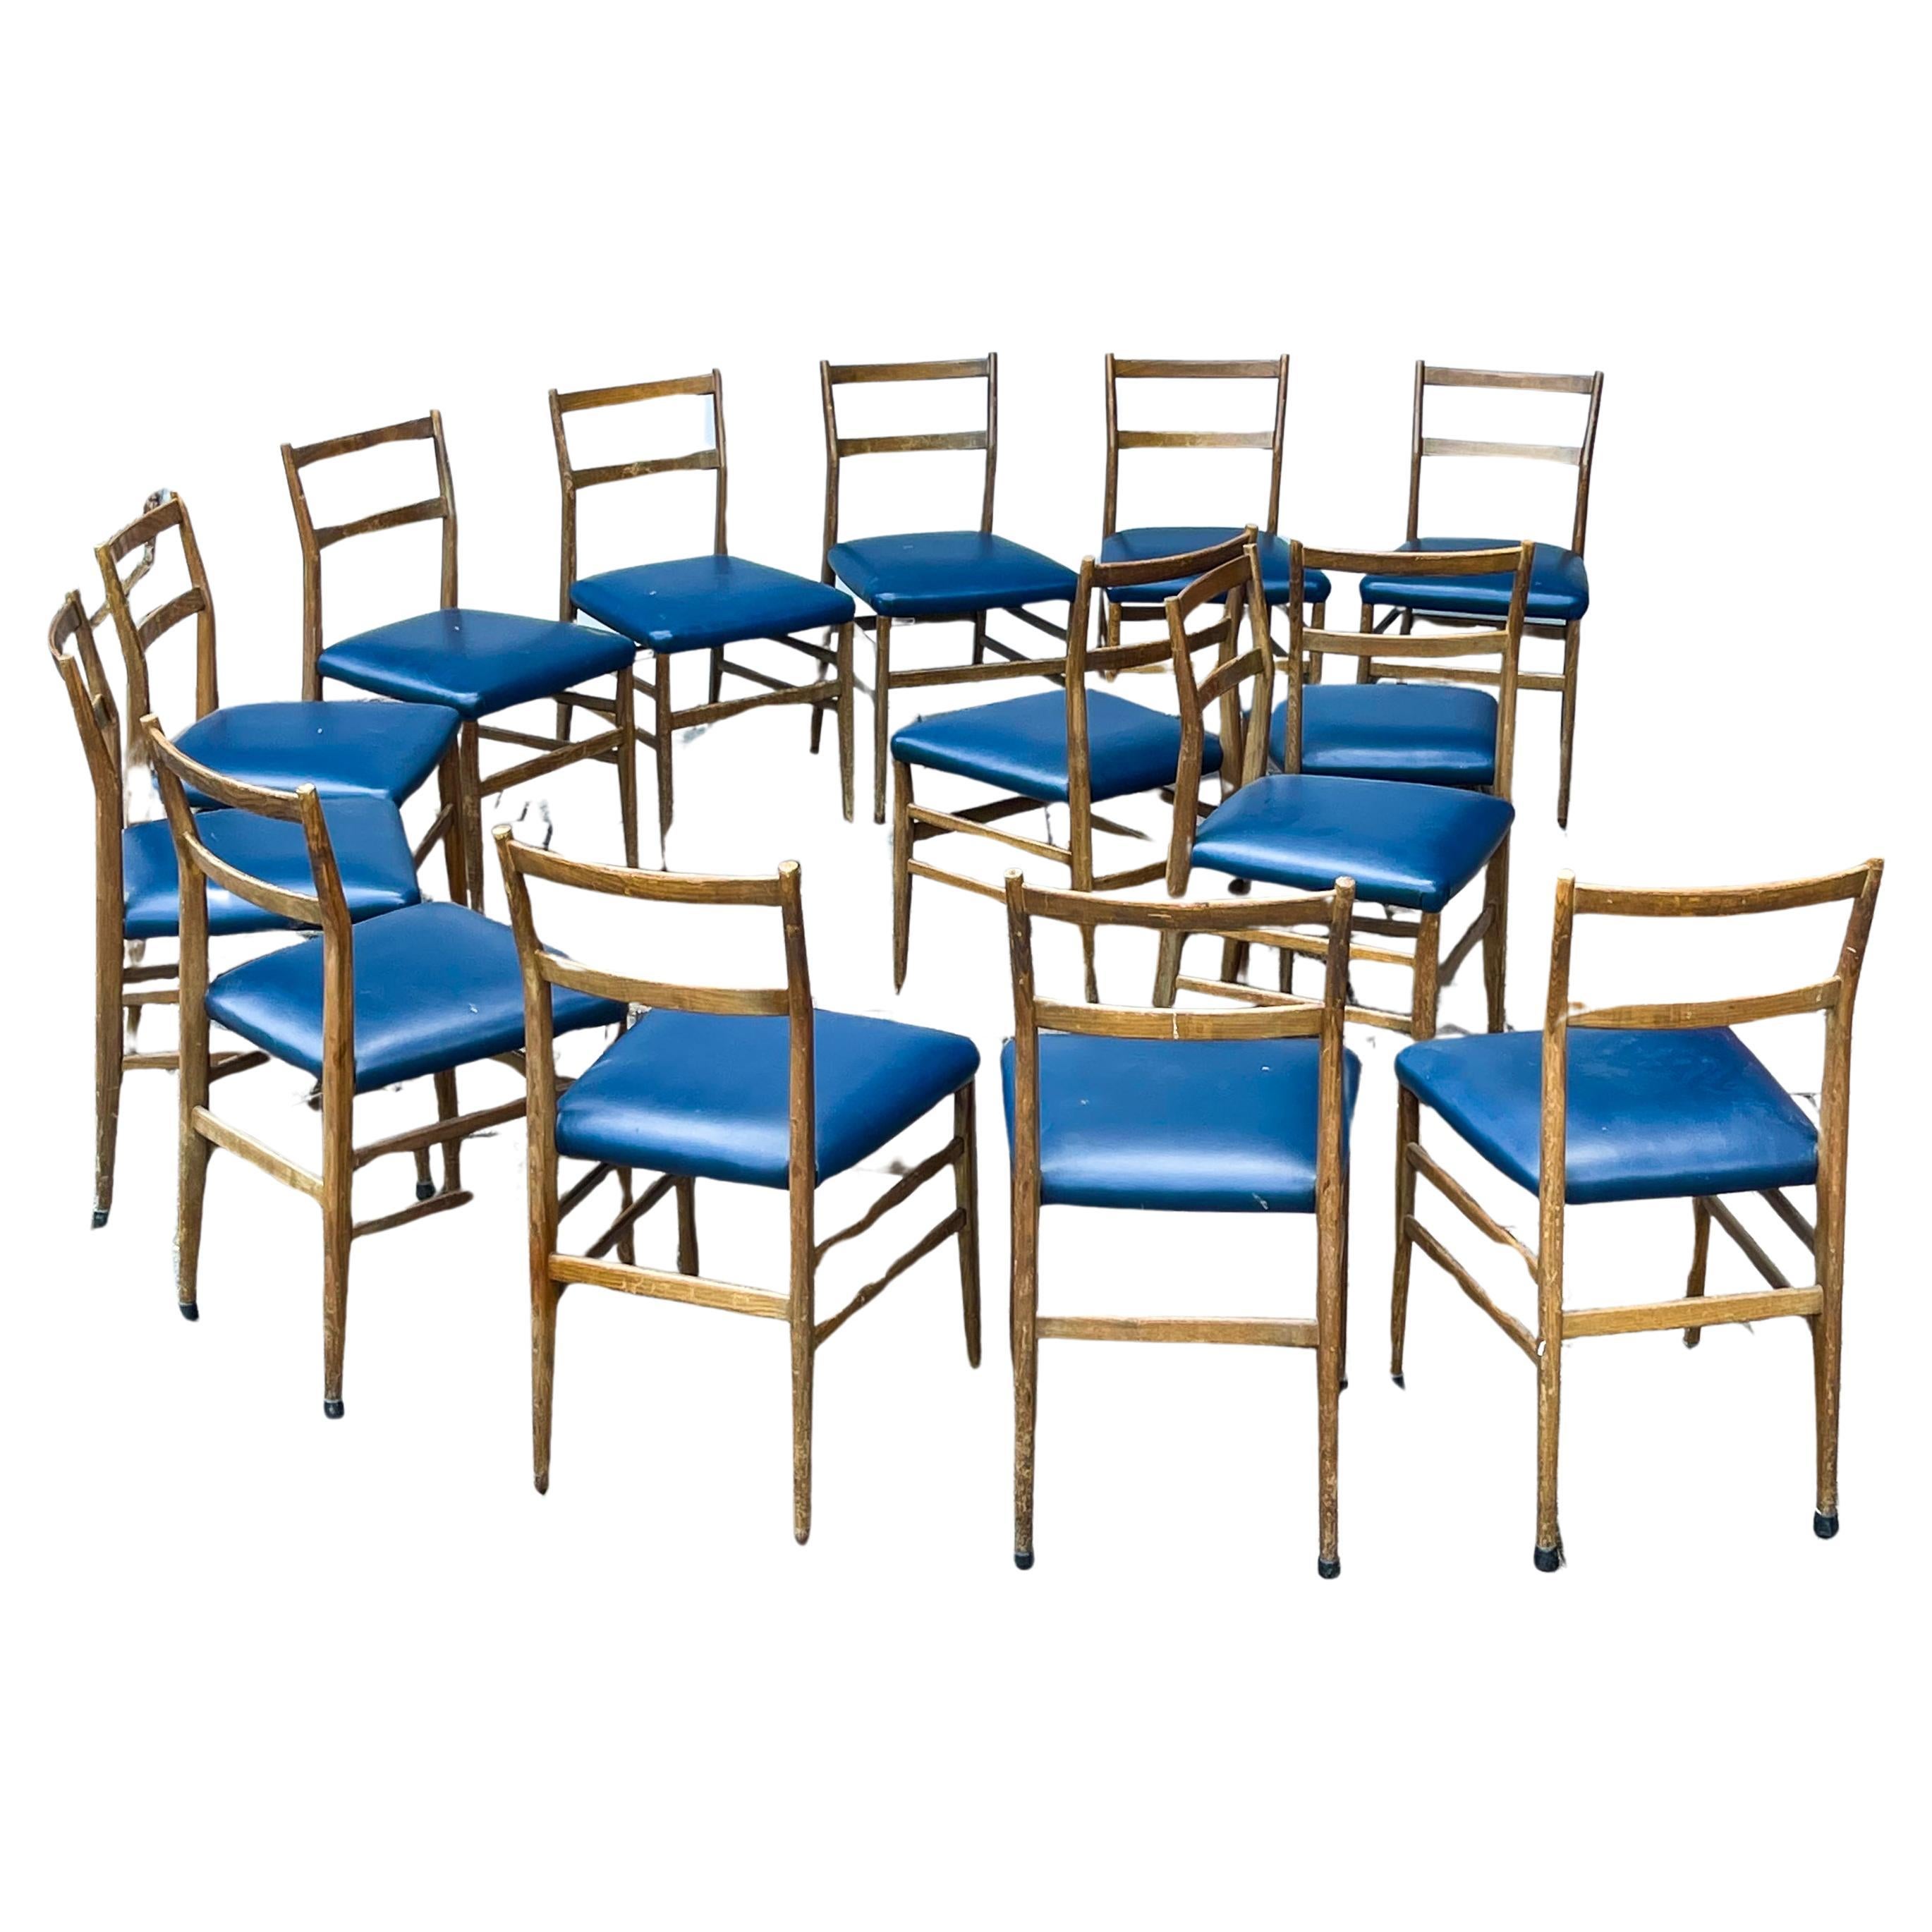 14 Leggera chairs by Gio Ponti - Wood And Blue Leather - Original Conditions  For Sale